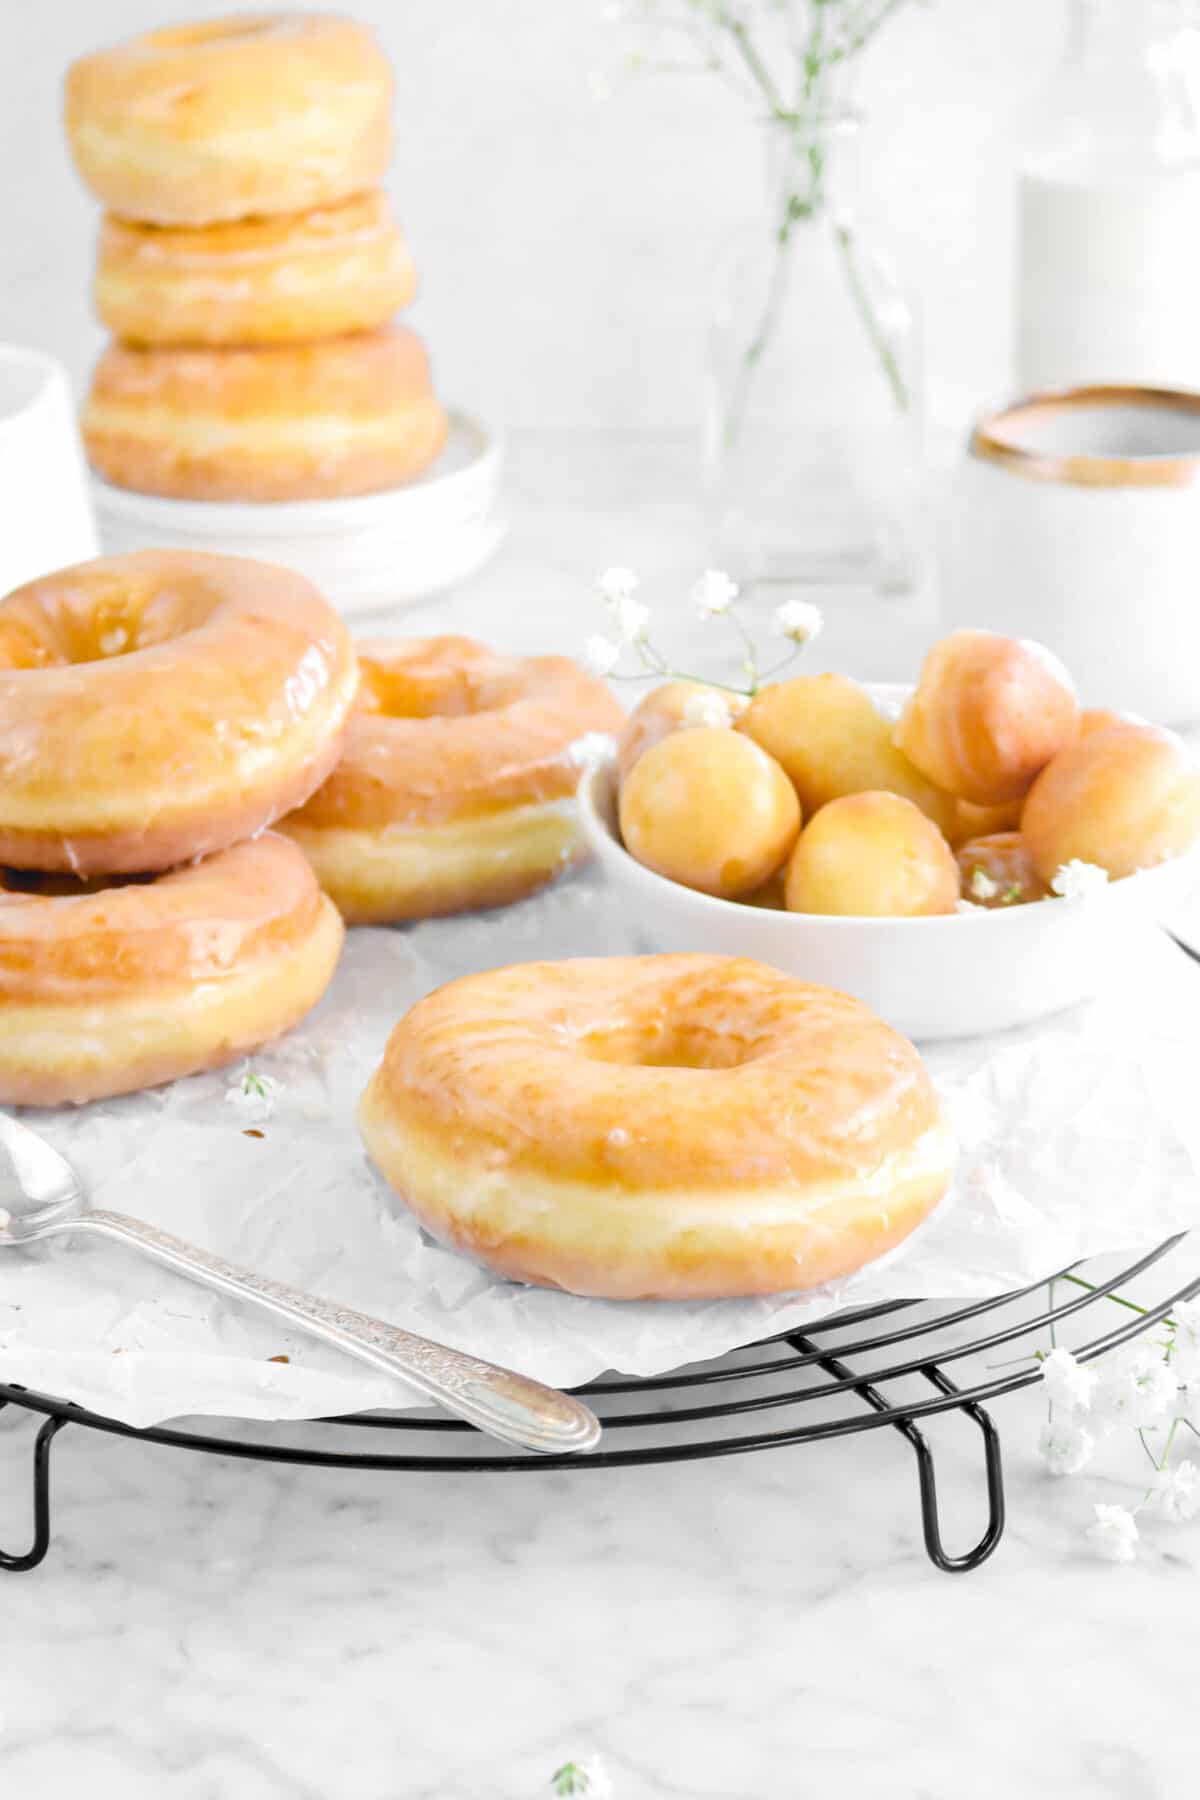 glazed doughnuts on wire cooling rack with doughnut holes in a white bowl, flowers, a stack of doughnuts behind